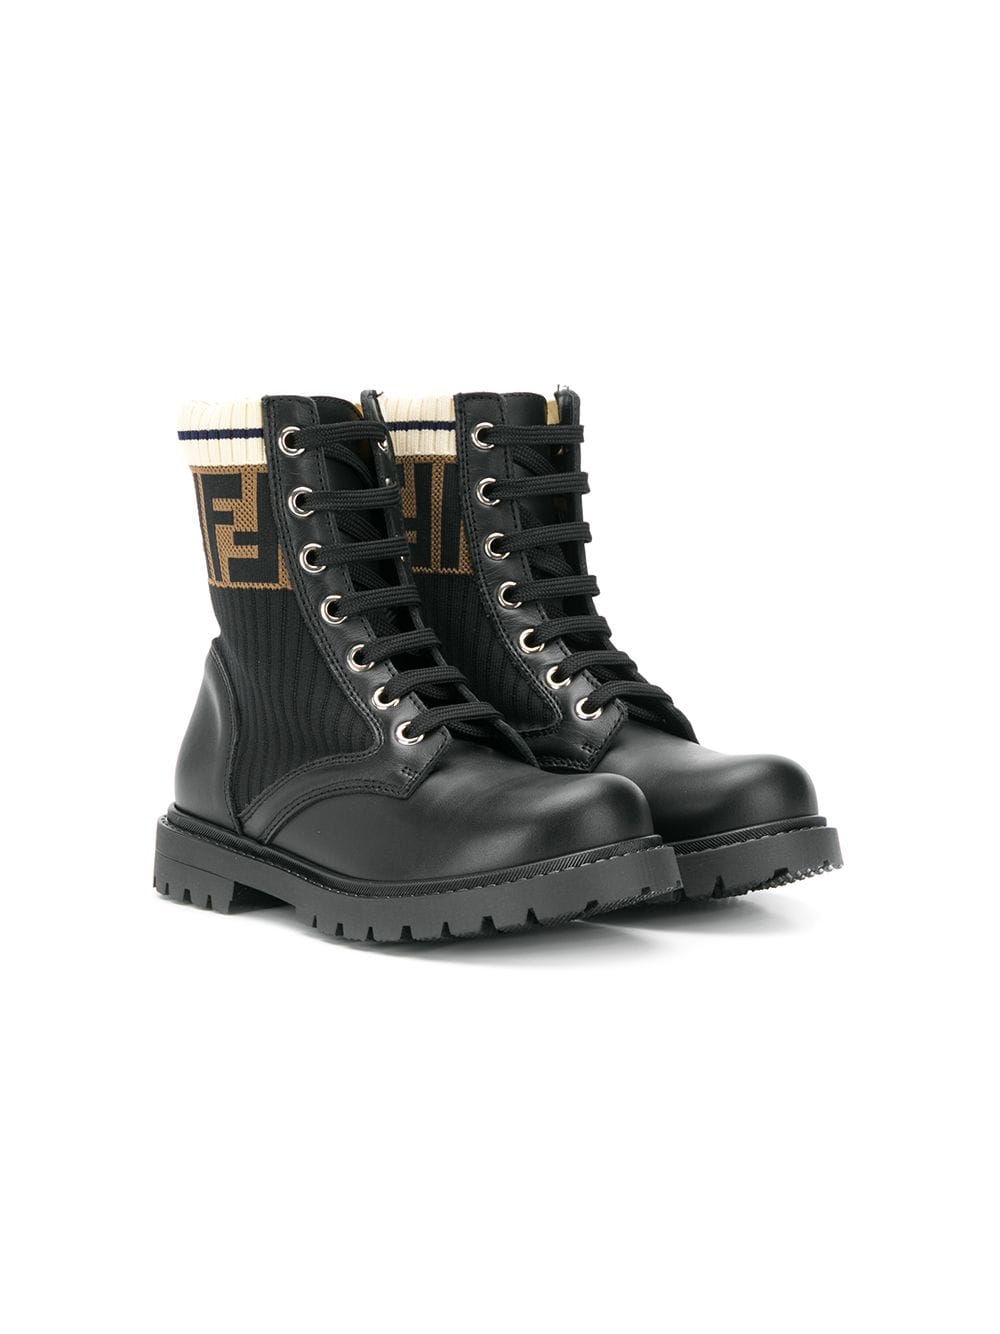 Here's Where You Can Get Blue Ivy's Fendi Boots